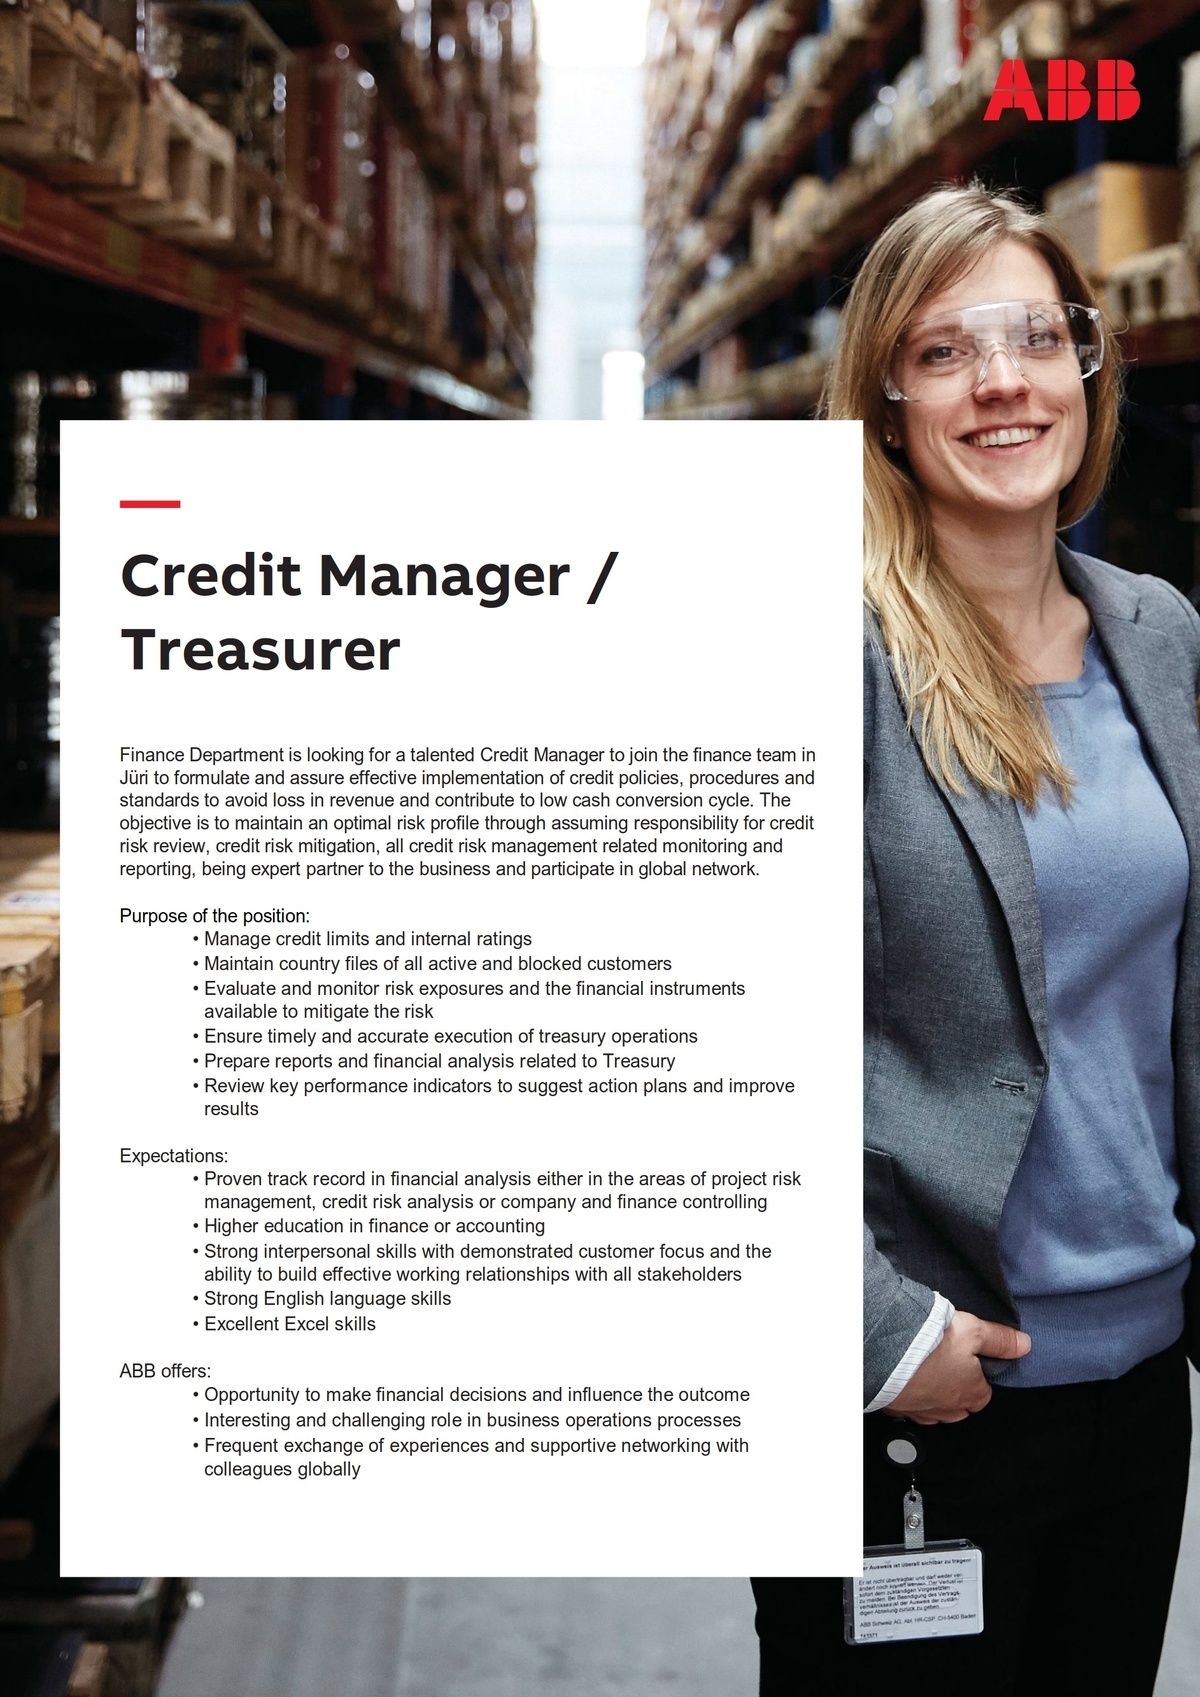 ABB AS Credit Manager / Treasurer